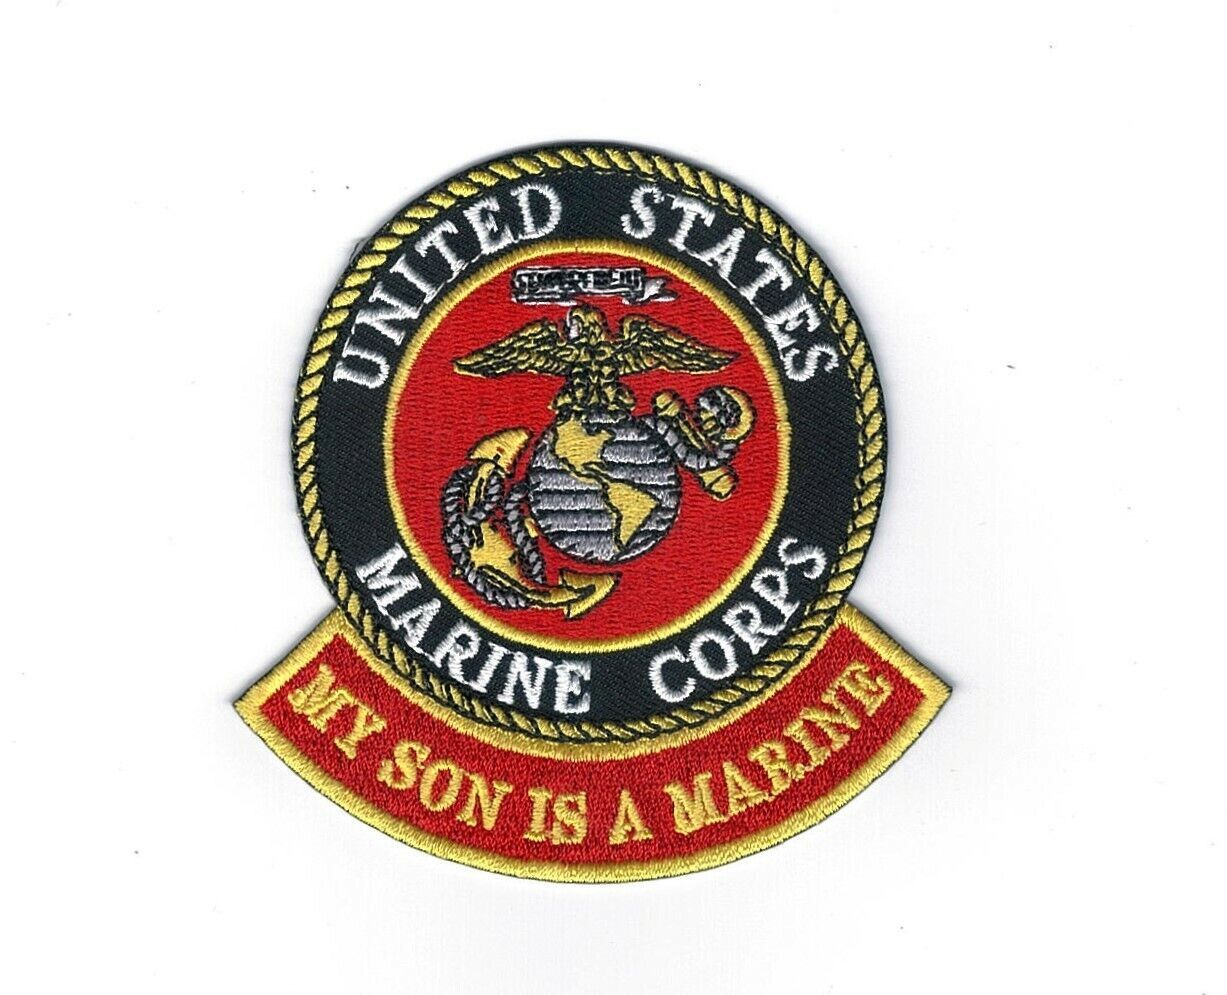 MARINE CORPS LOGO MY SON IS A U.S. MARINE Embroidered Shoulder Patch (0029)